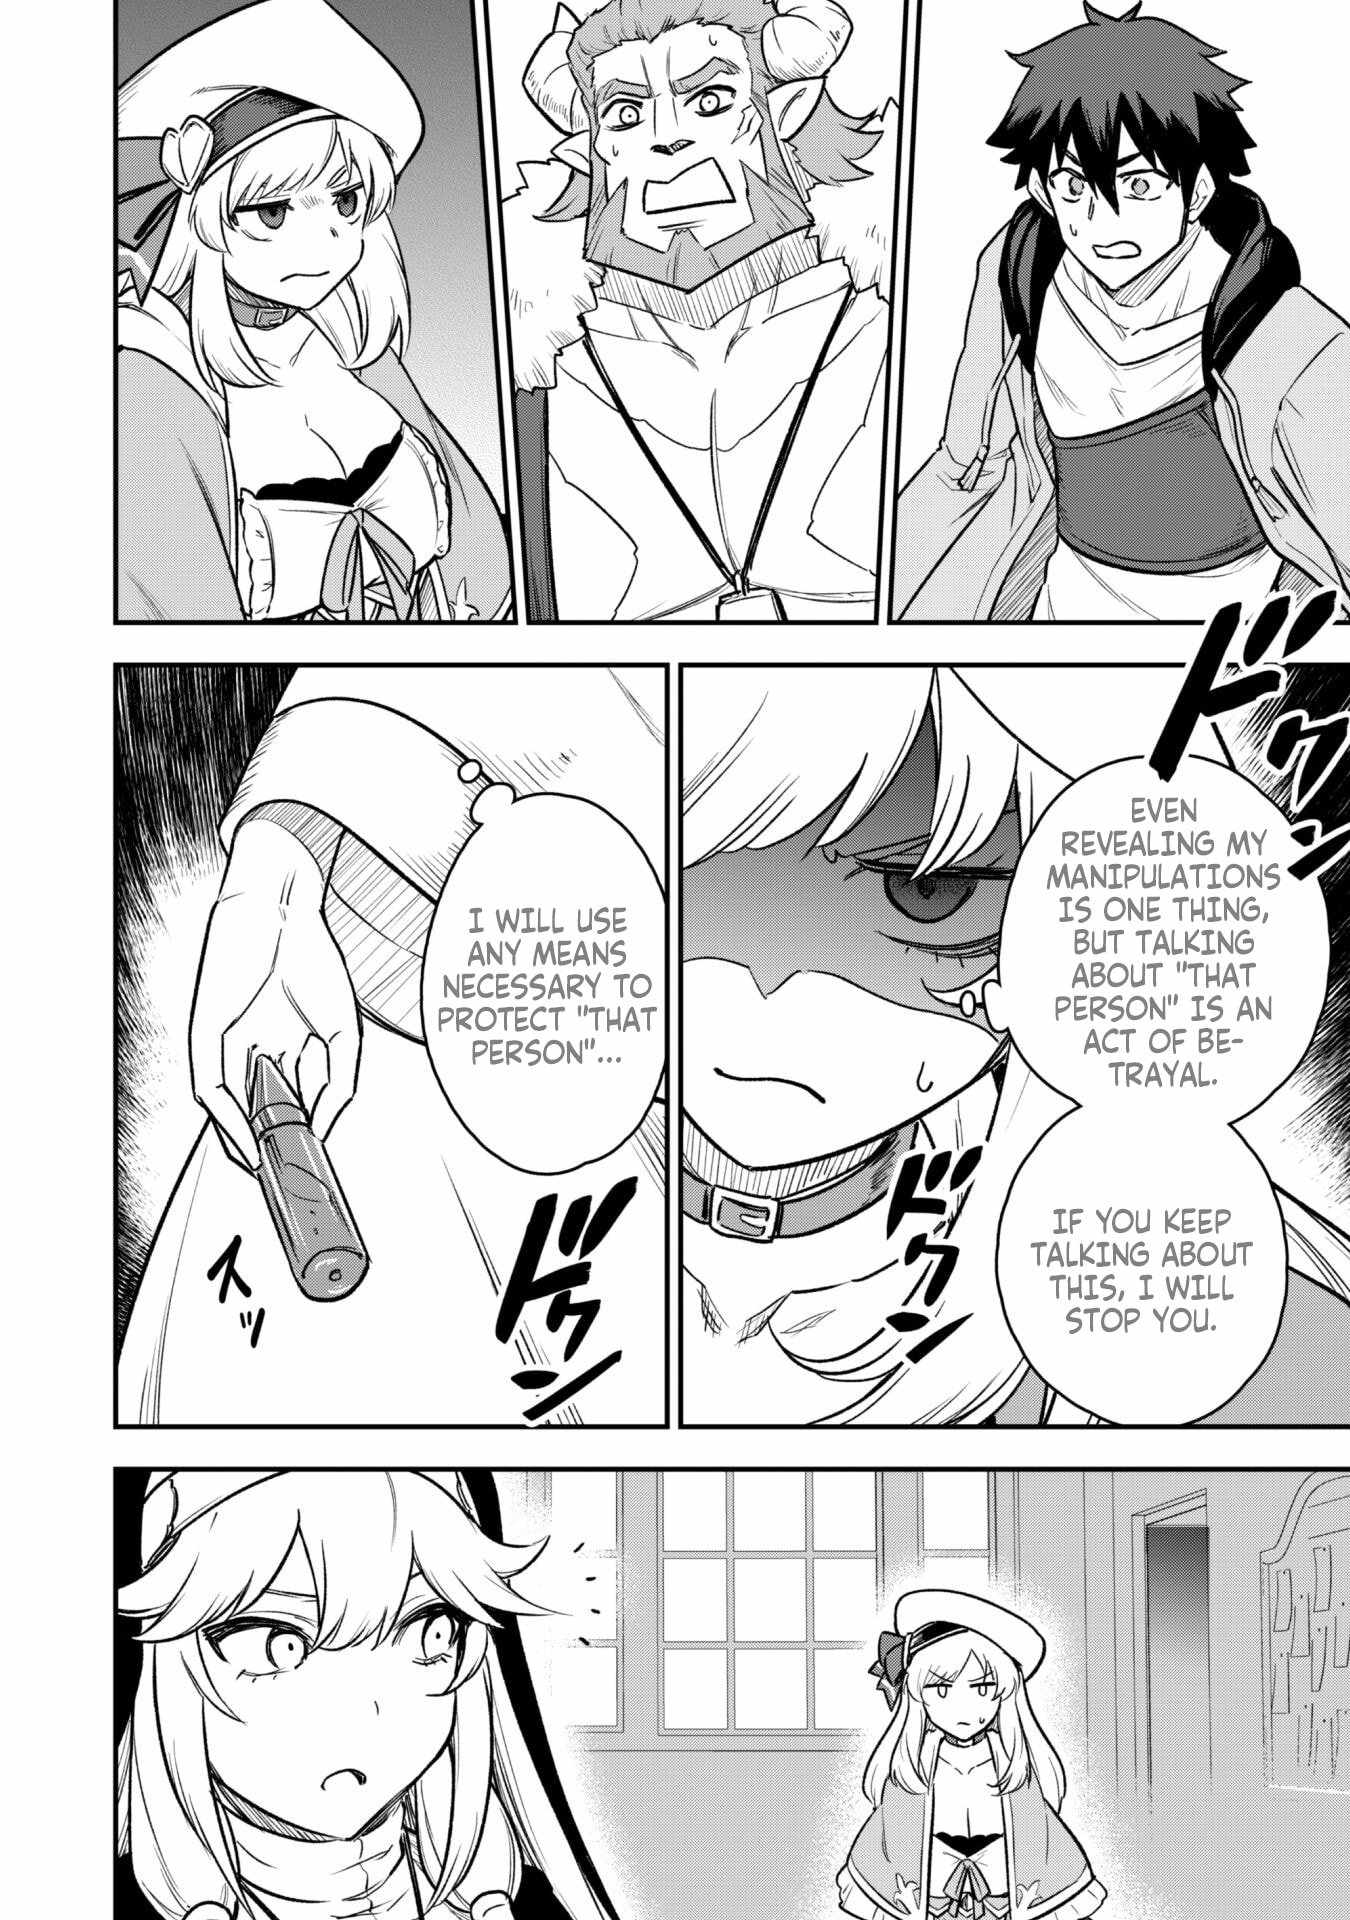 The White Mage Who Joined My Party Is a Circle Crusher, So My Isekai Life Is at Risk of Collapsing Once Again Chapter 12-2-eng-li - Page 3